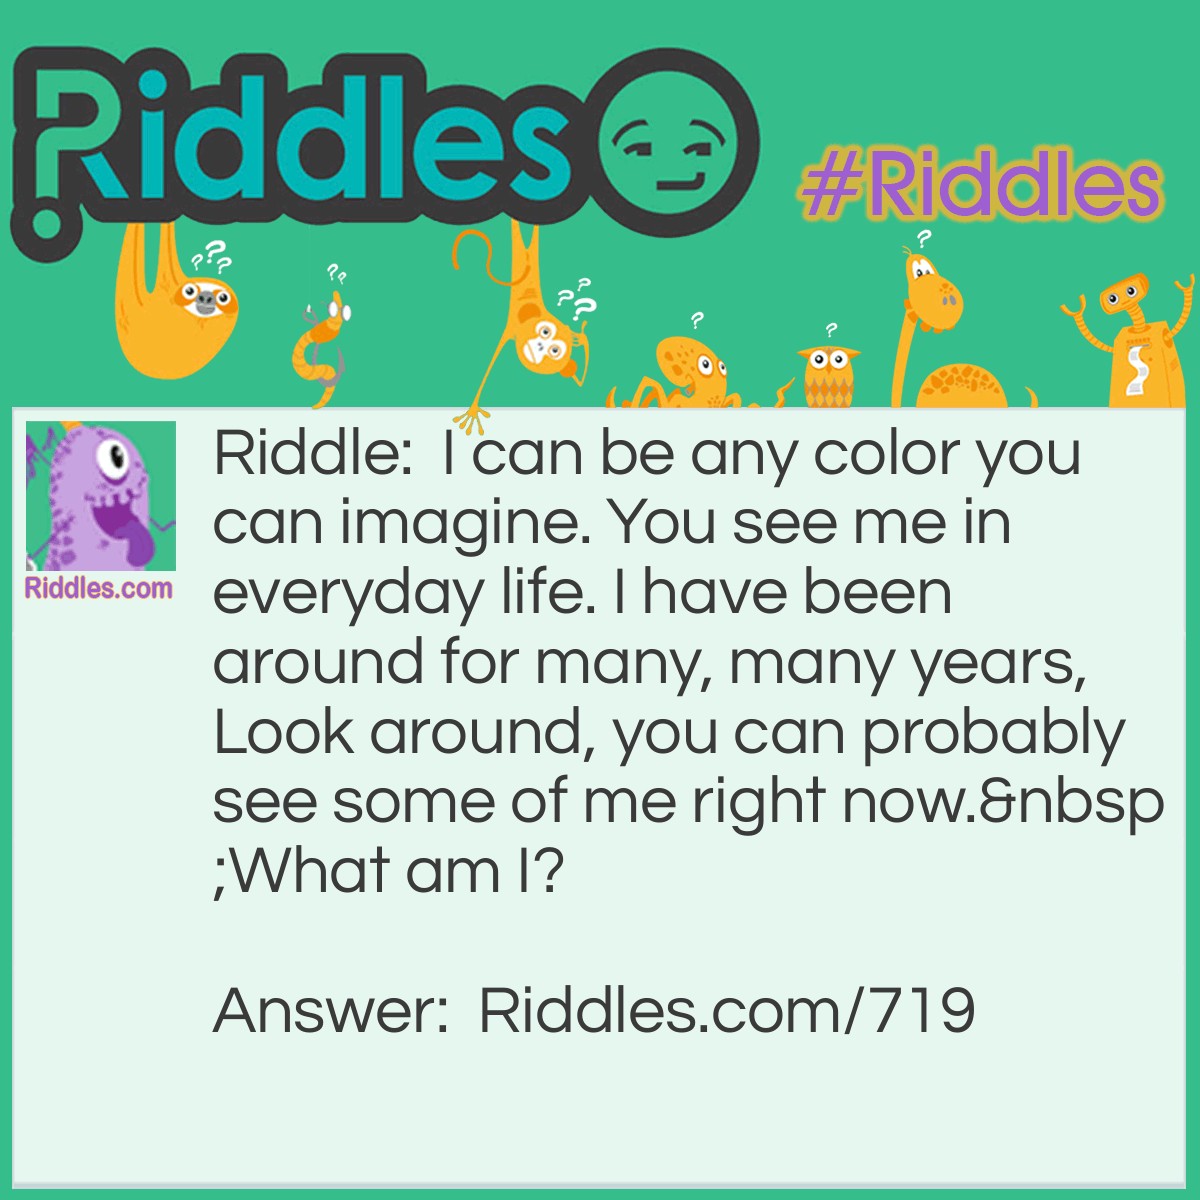 Riddle: I can be any color you can imagine. You see me in everyday life. I have been around for many, many years, look around, you can probably see some of me right now. 
What am I? Answer: Paint.